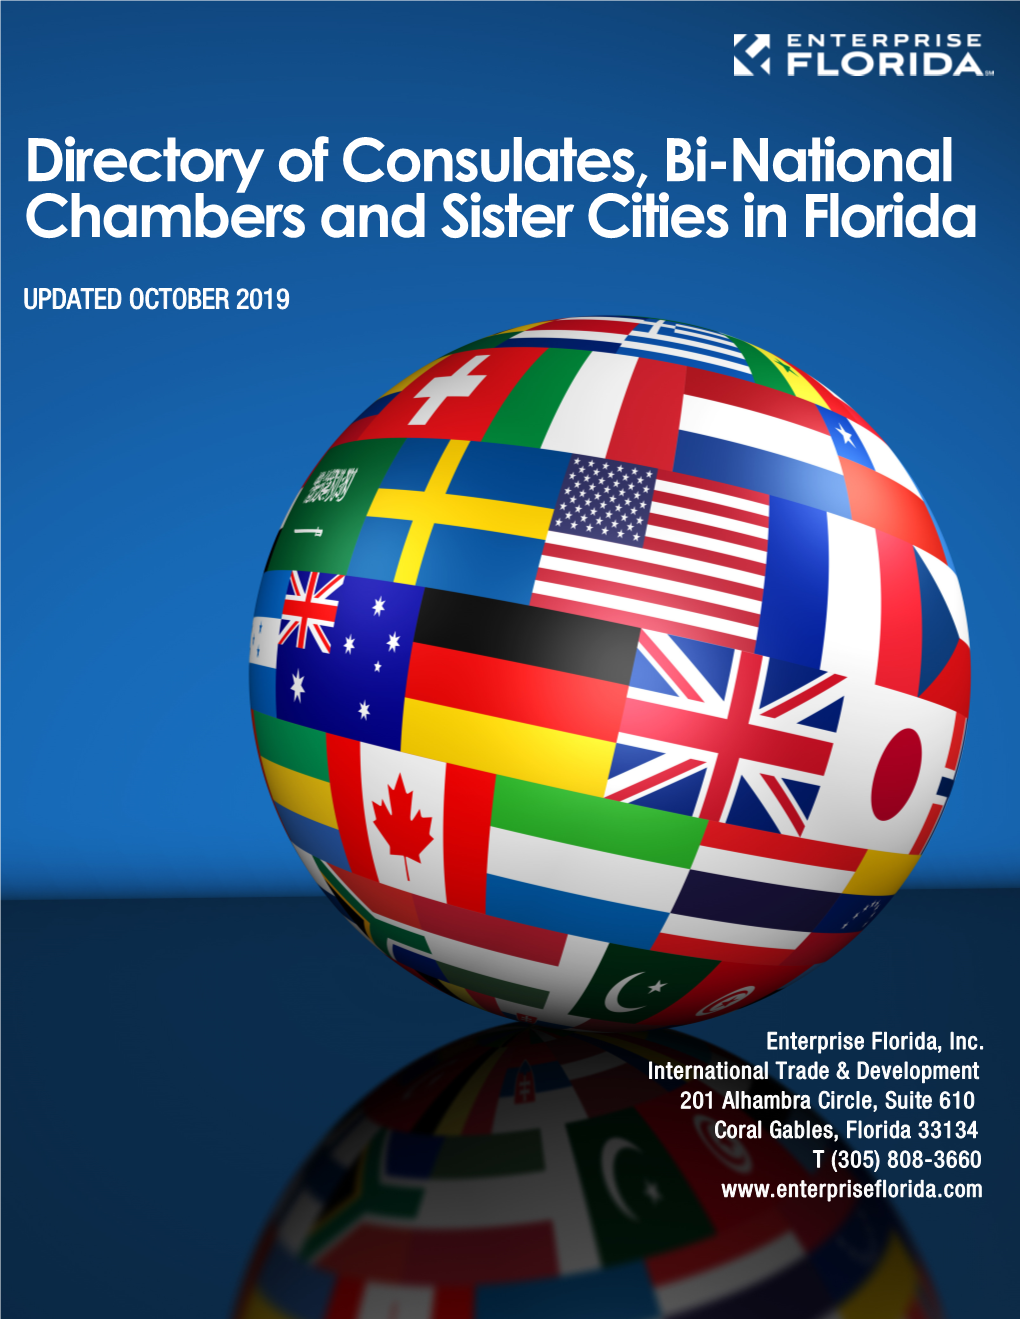 Directory of Consulates, Chambers and Sister